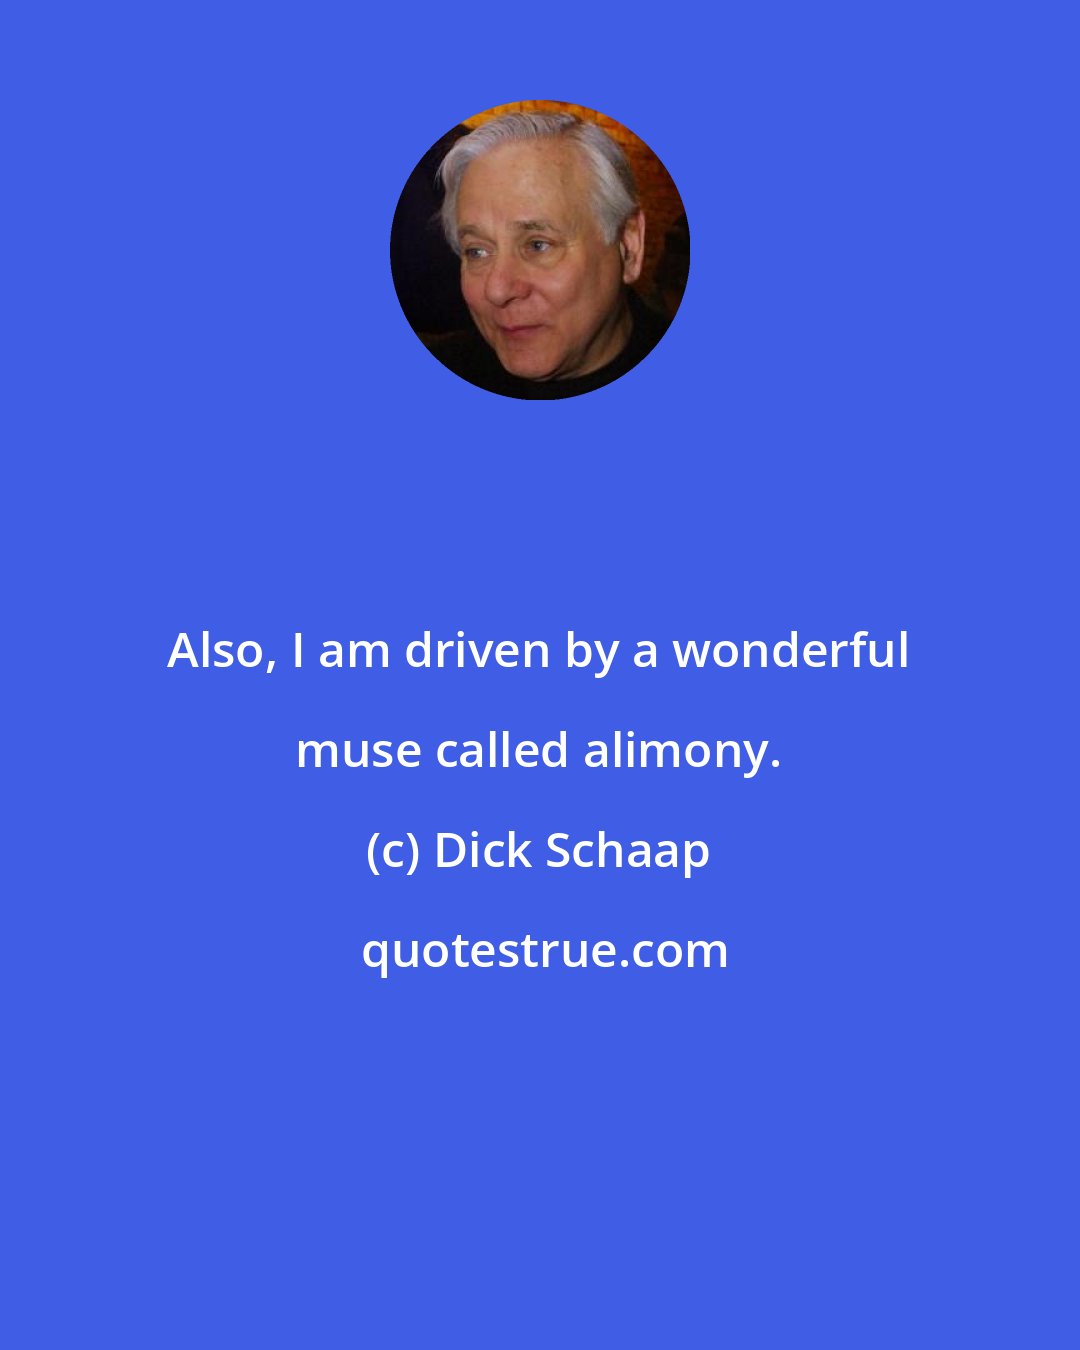 Dick Schaap: Also, I am driven by a wonderful muse called alimony.